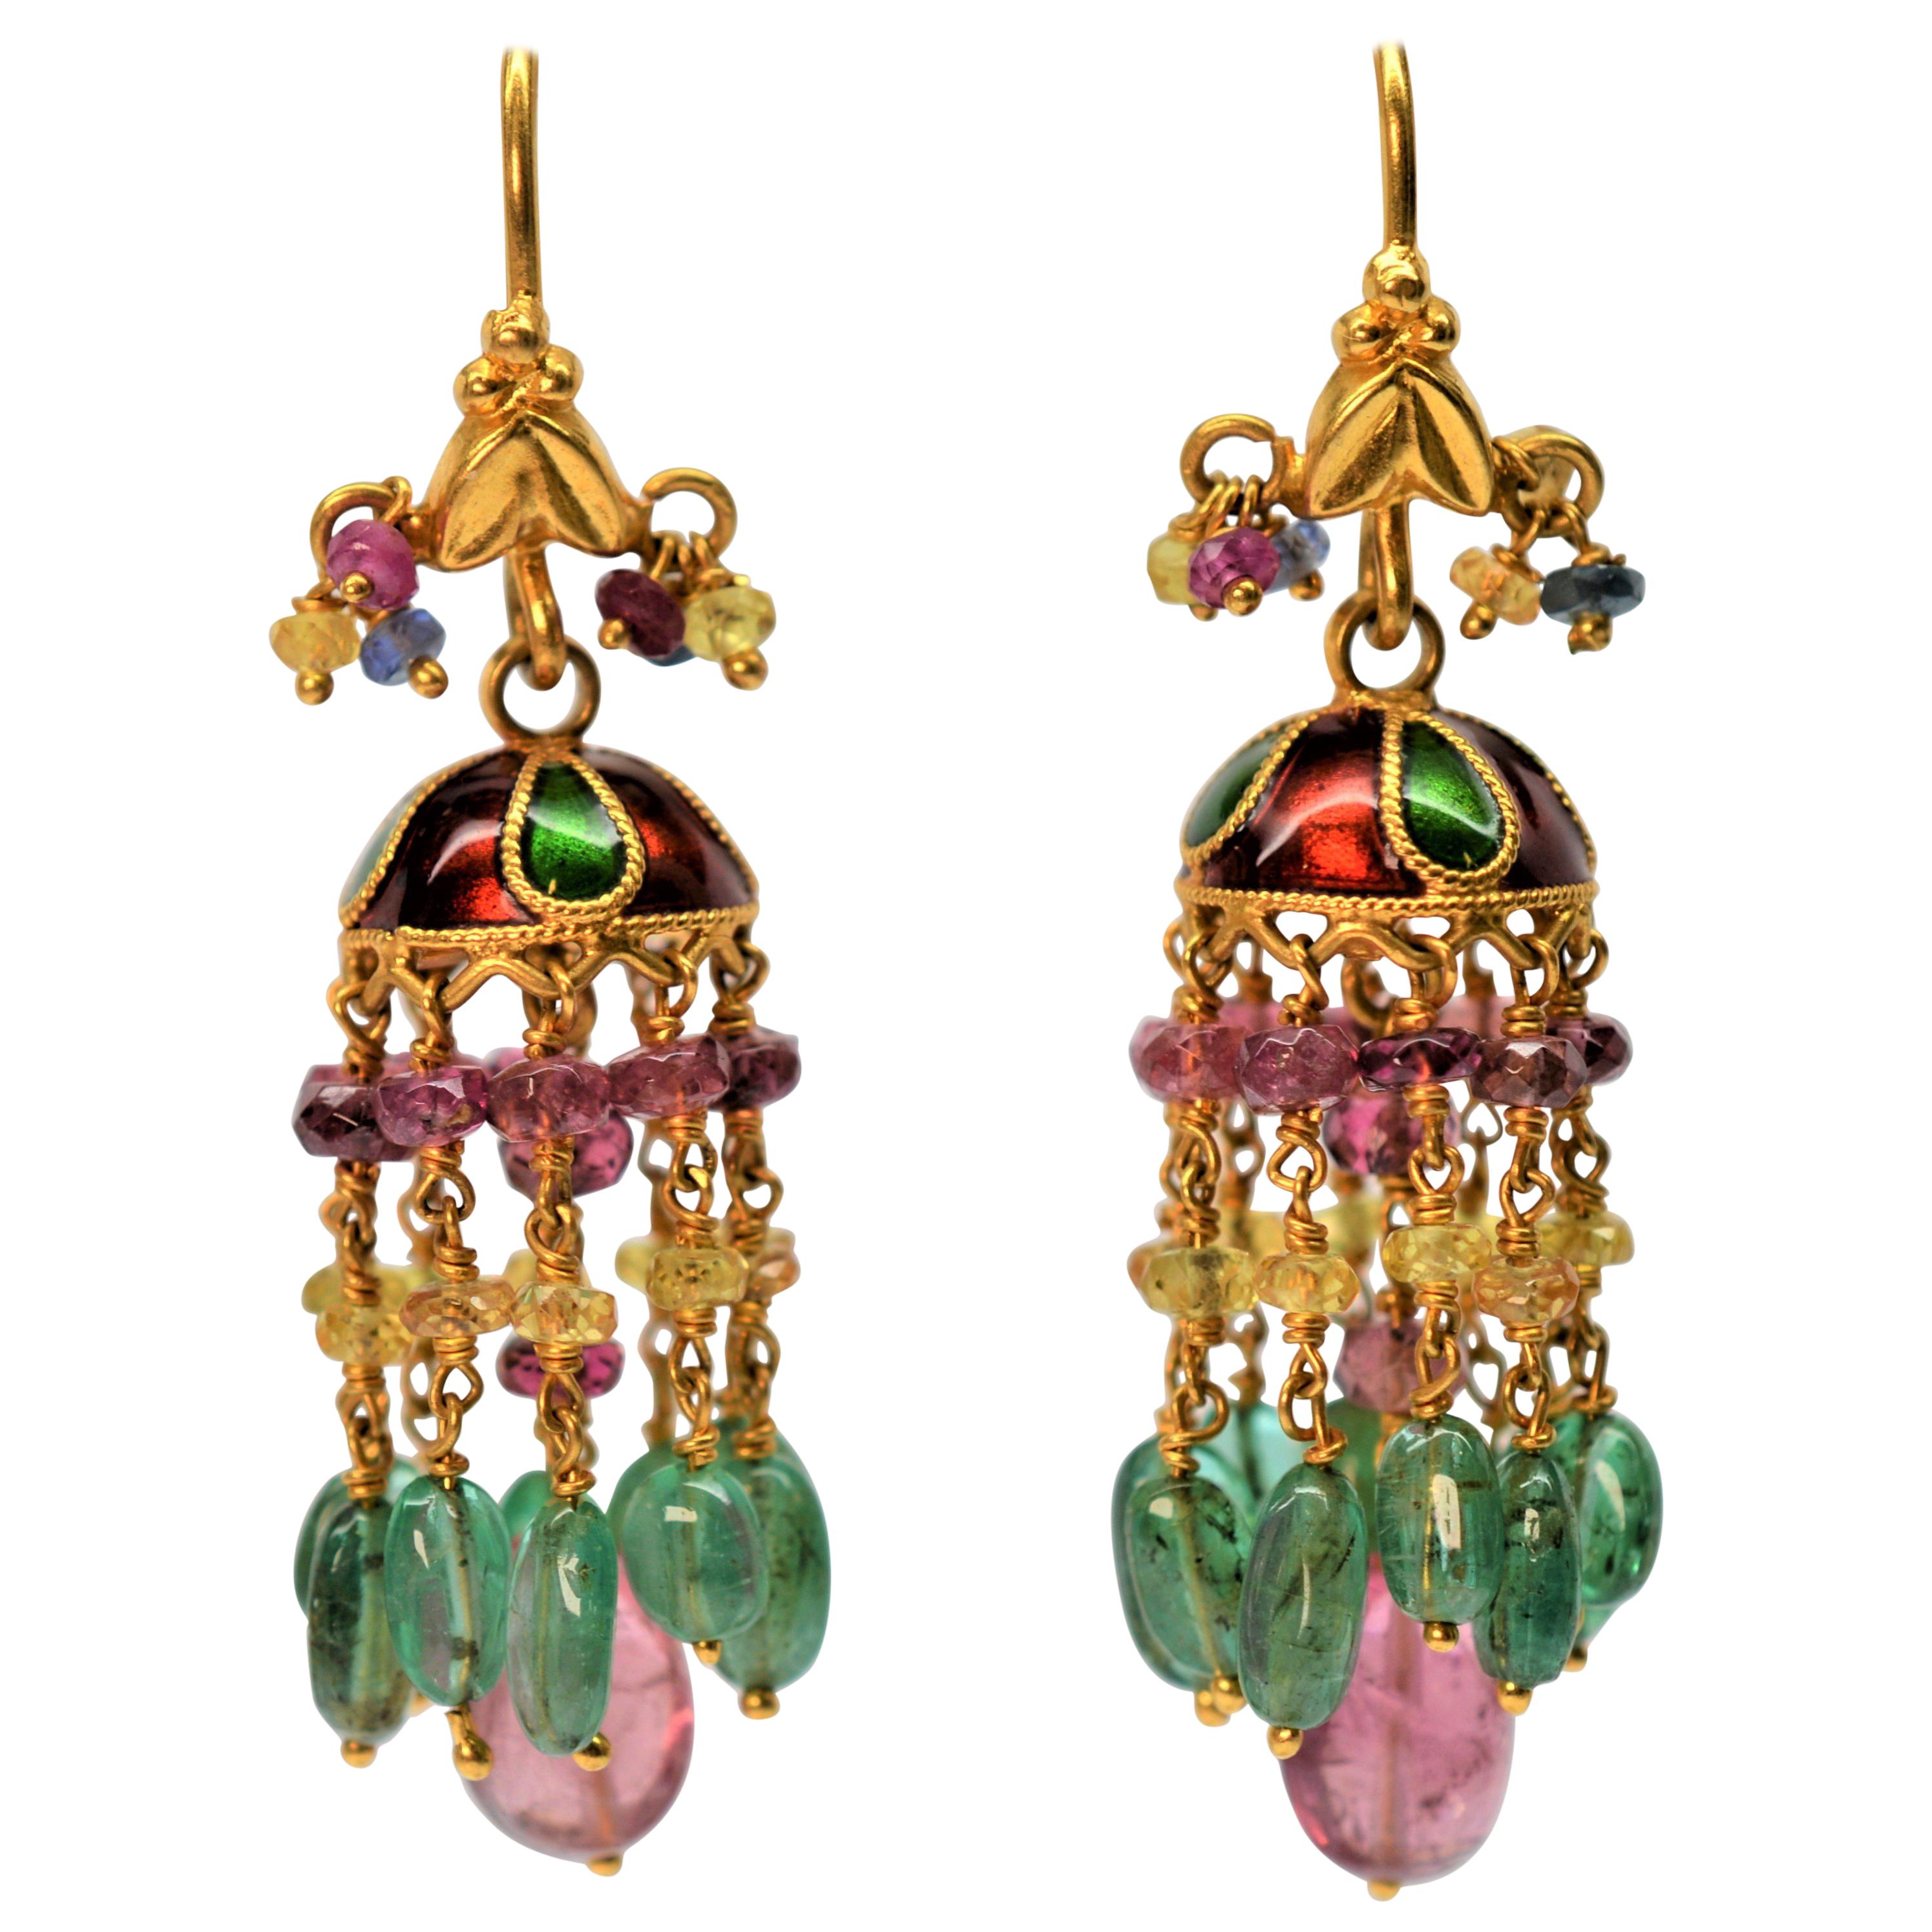 22 Karat Yellow Gold Emerald and Ruby Earrings with Enamel Accents